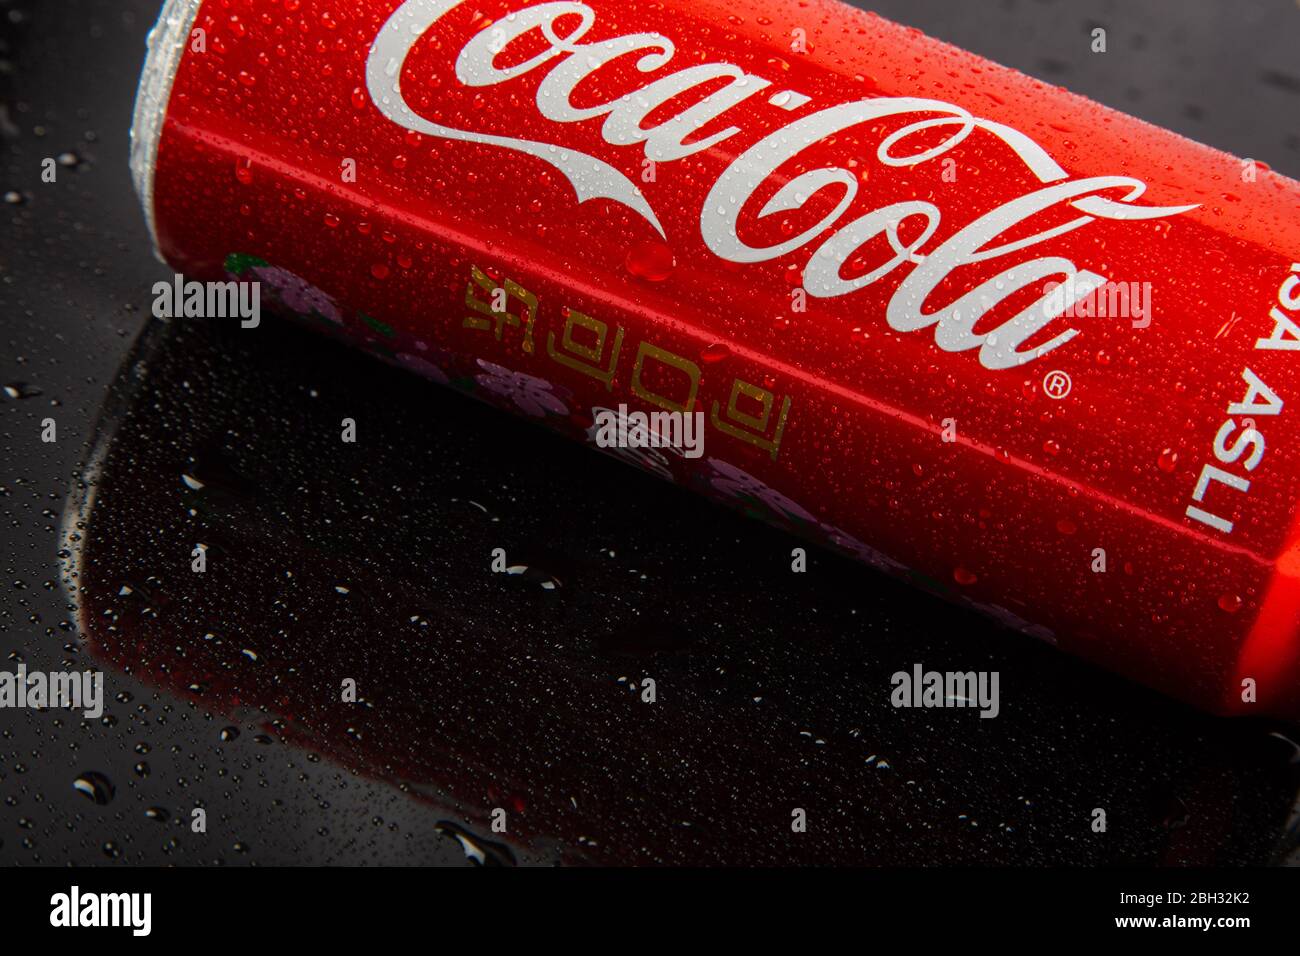 Lviv, Ukraine - December 1, 2017: Coca cola bottle, stylish bow tie, santa  socks and kit kat on straw in gift box with christmas lights. Top view. Gif  Stock Photo - Alamy